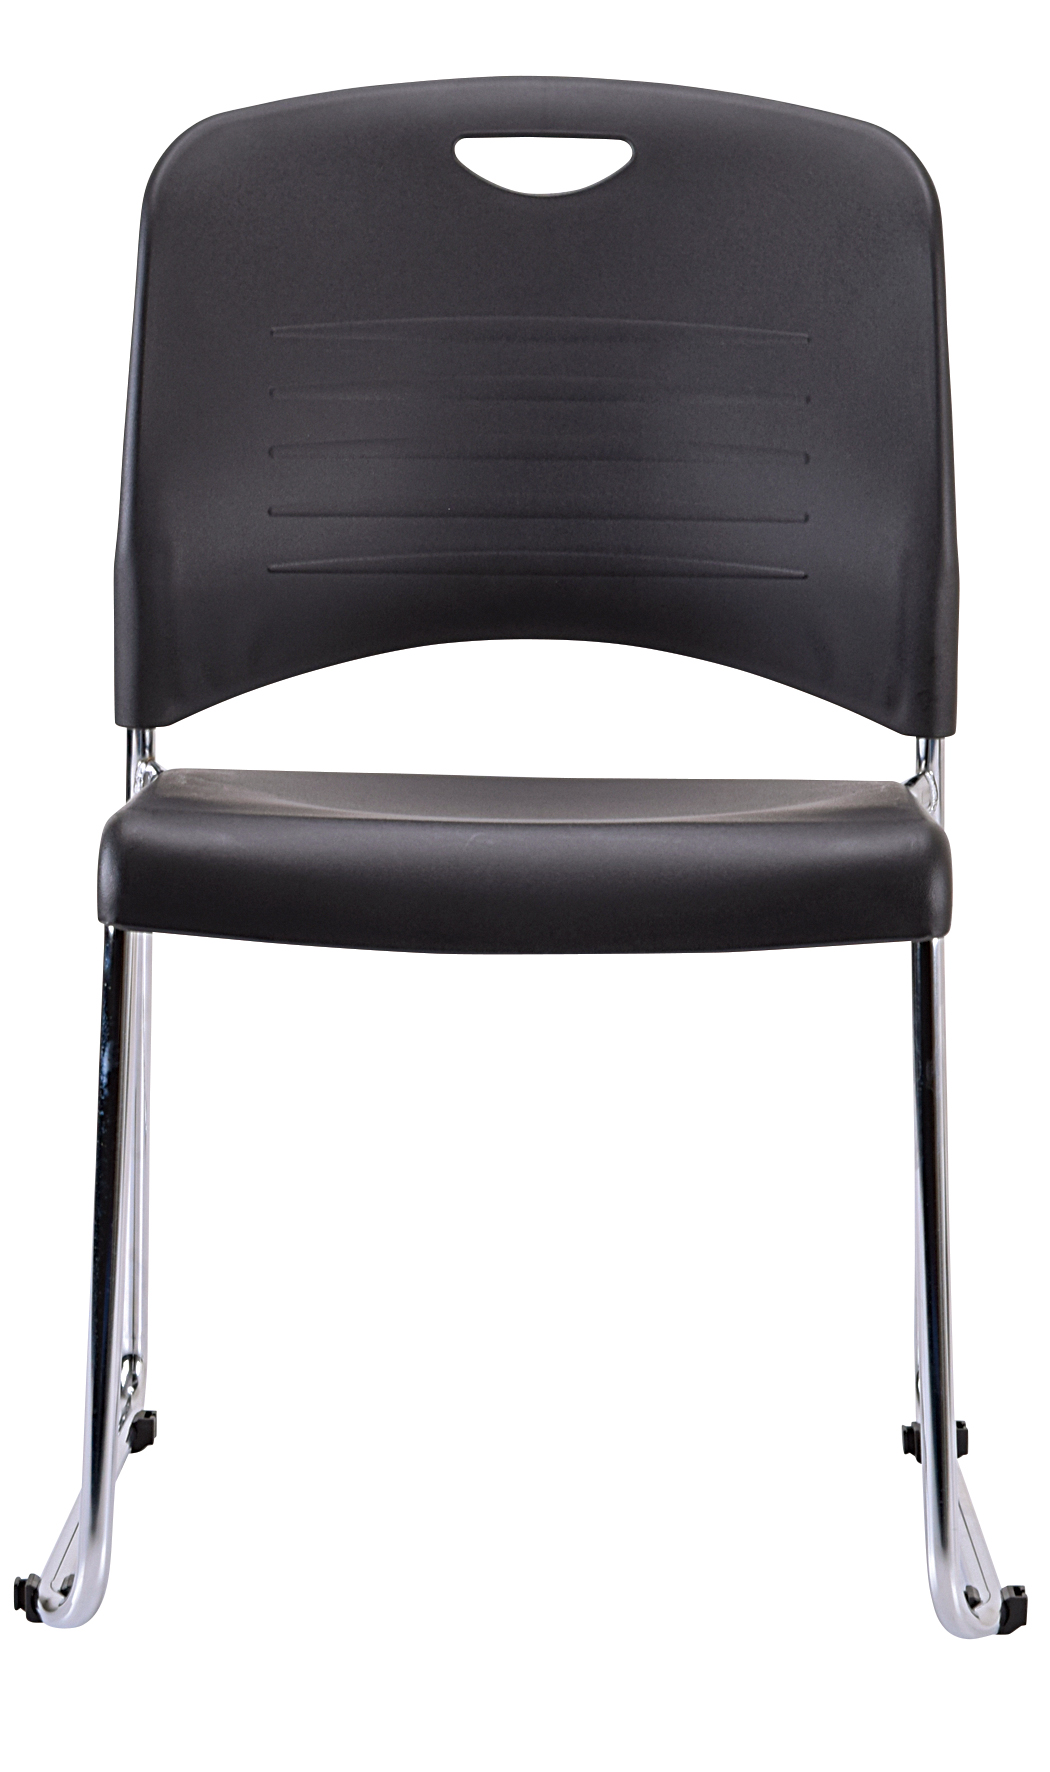 Set of Four Black and Silver Plastic Office Chair-372439-1